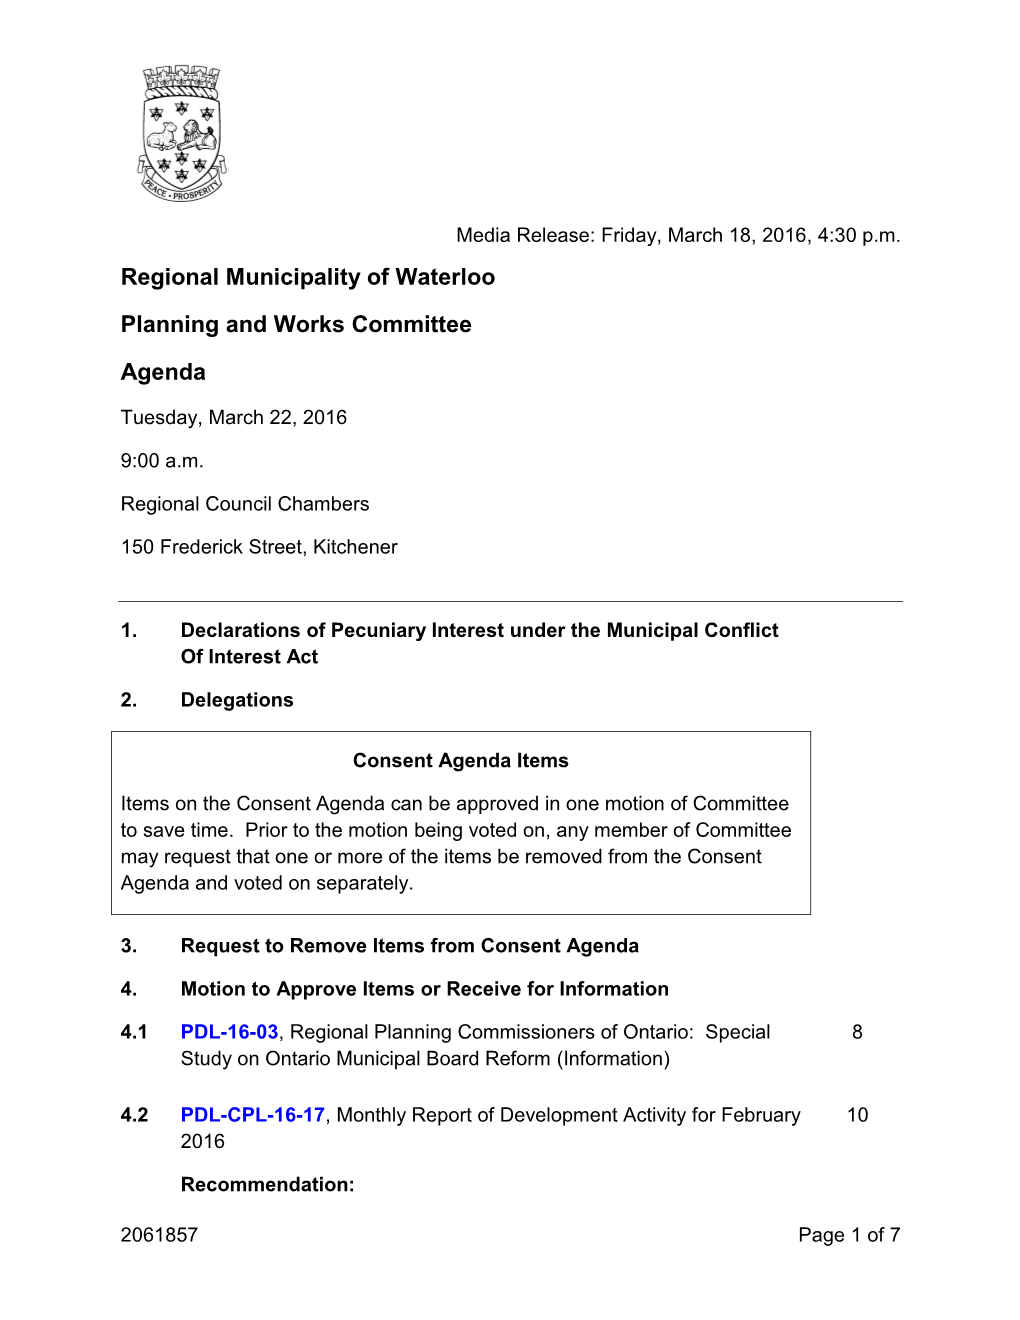 Planning and Works Committee Agenda